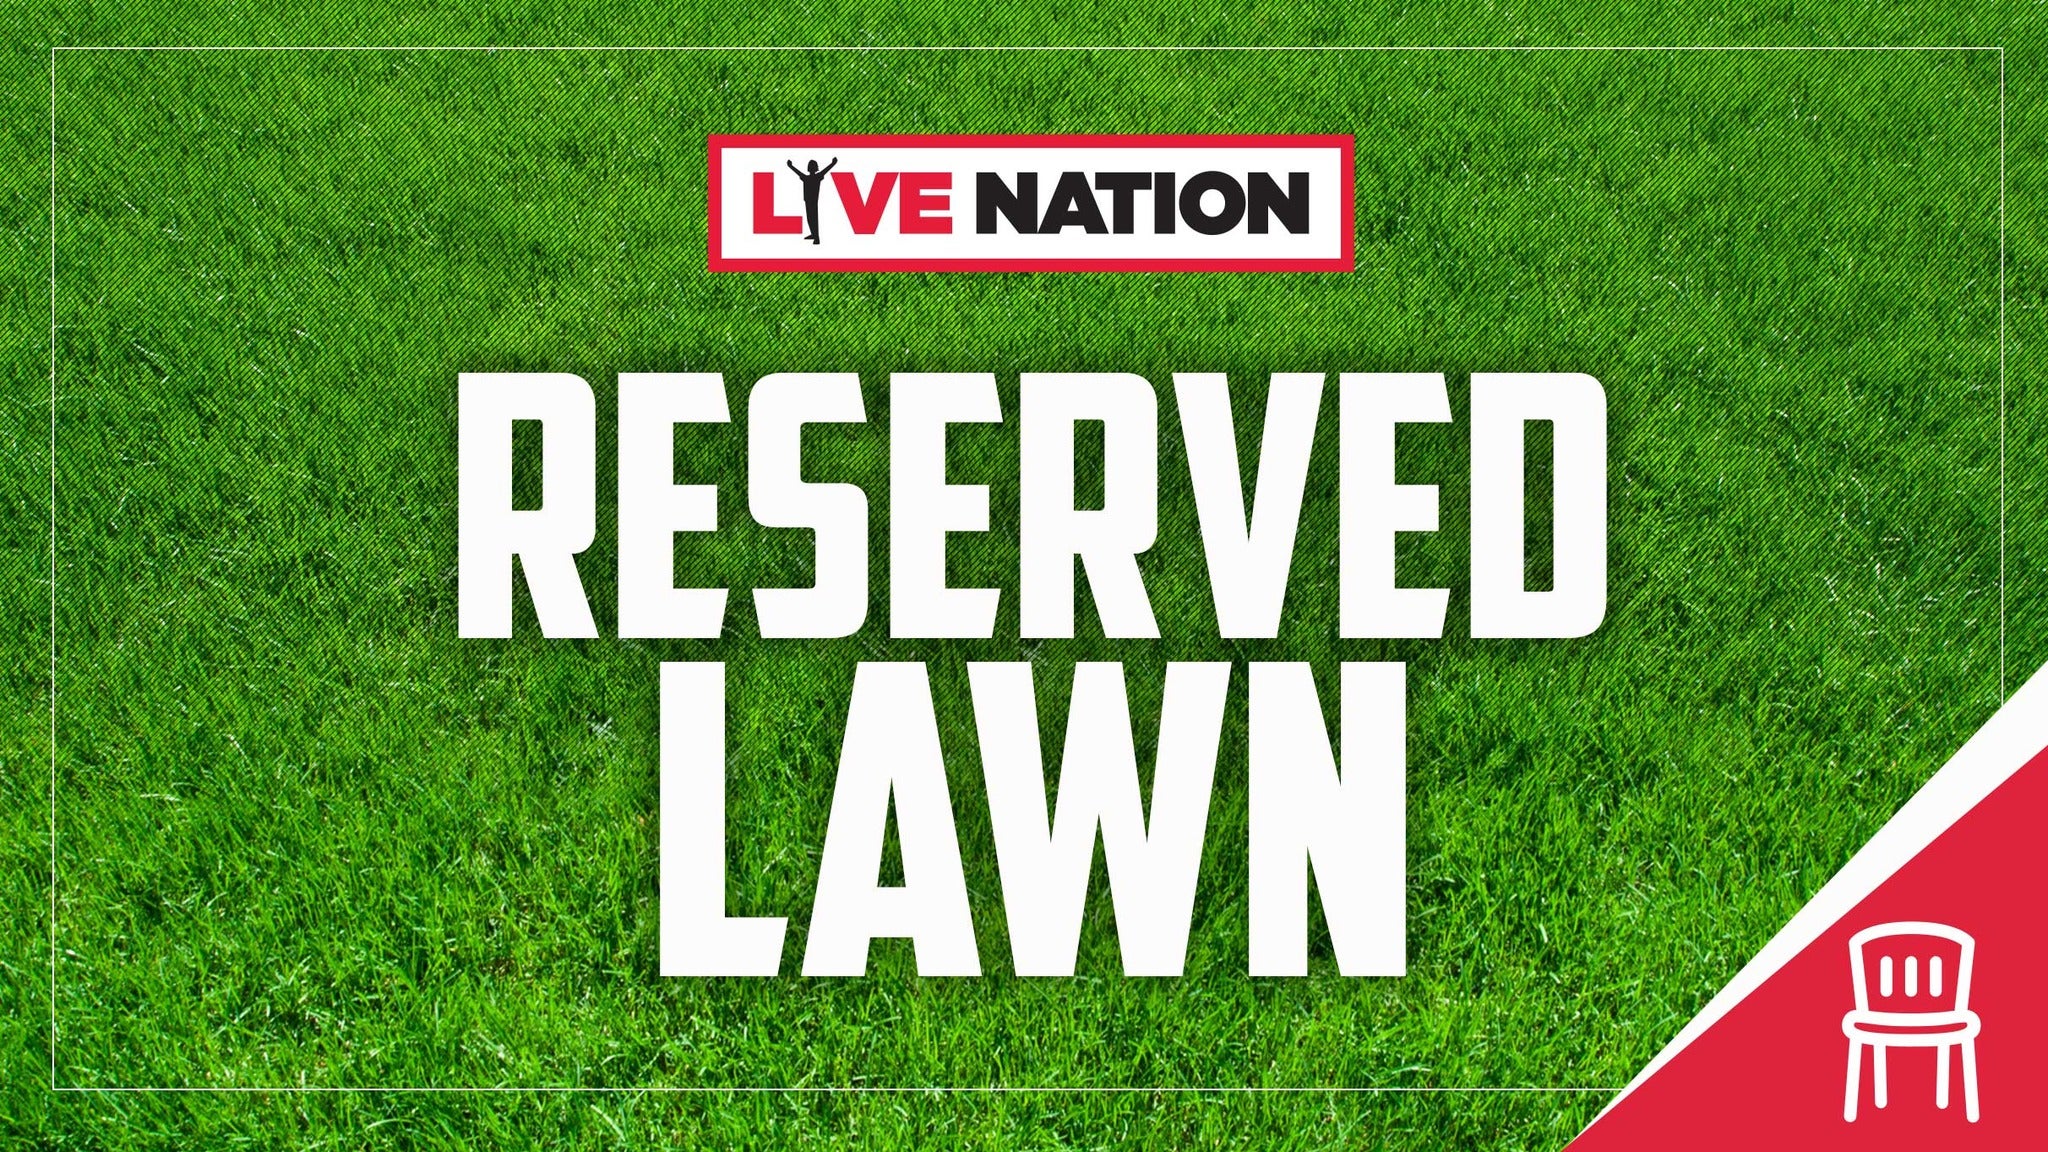 Jiffy Lube Live Reserved Lawn Tickets Event Dates & Schedule